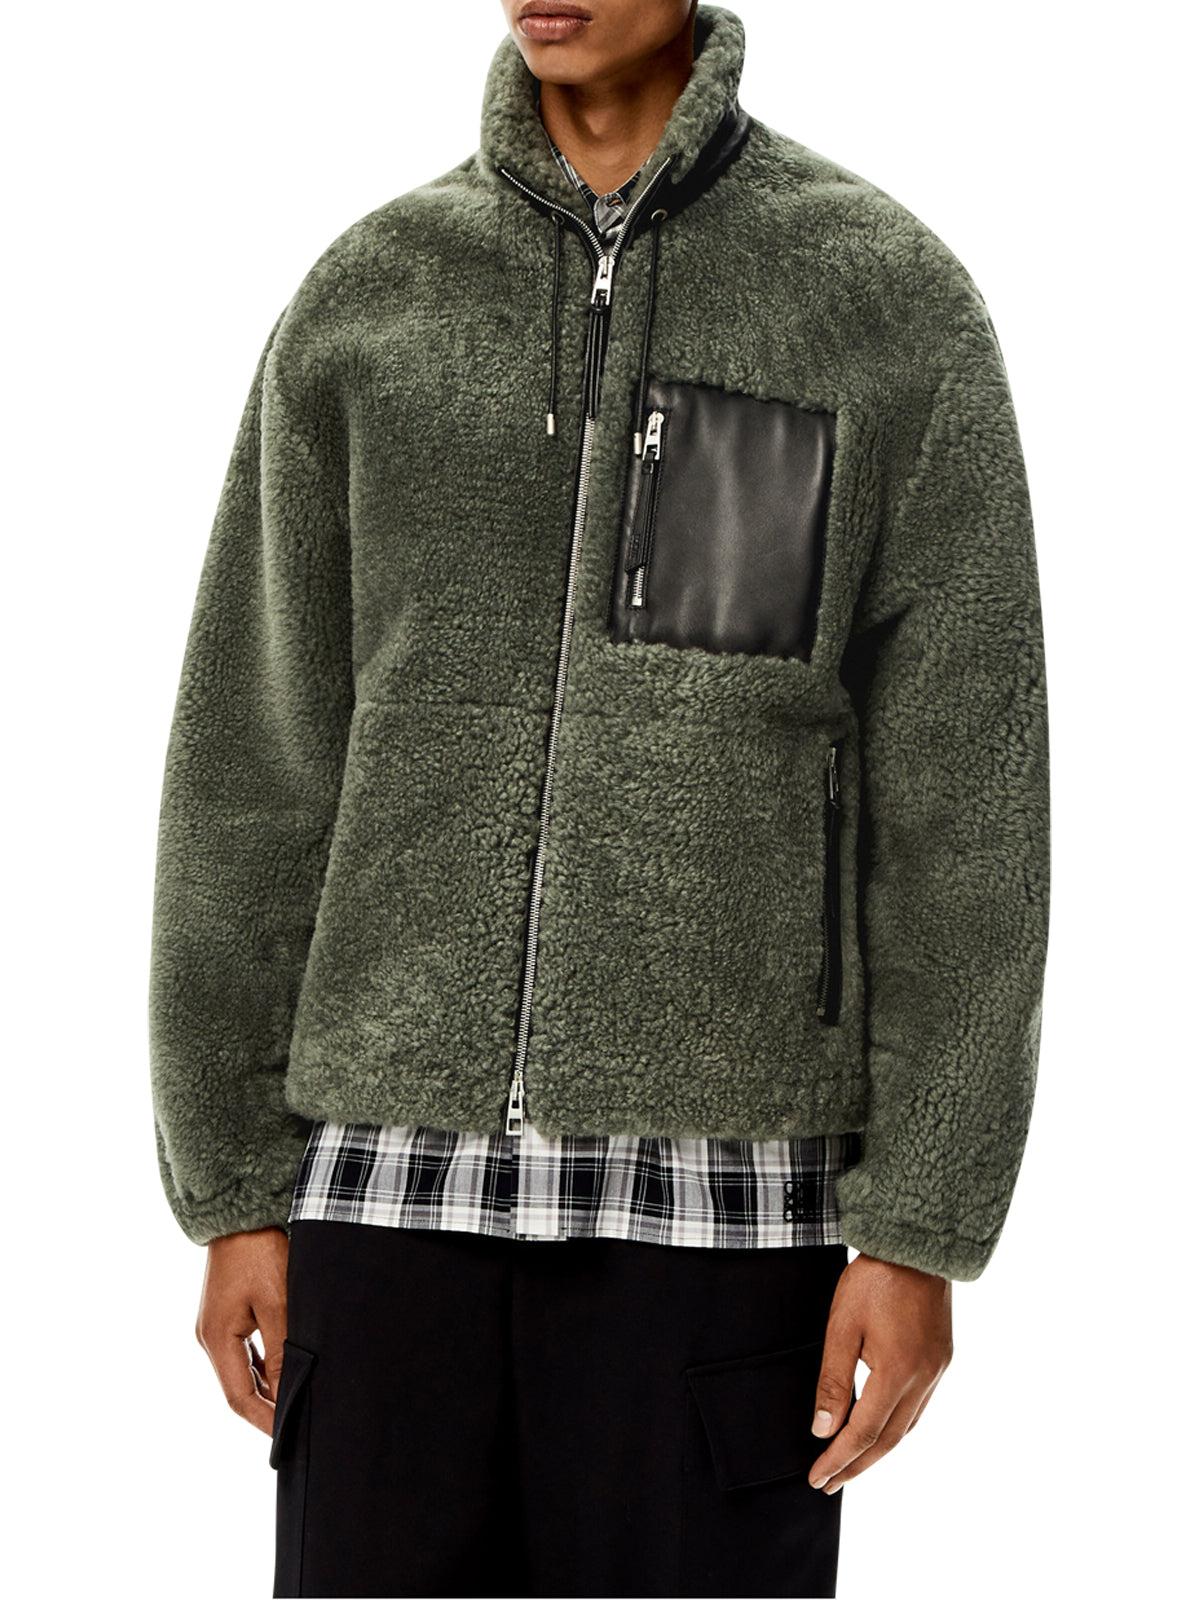 Loewe Leather Jacket In Nappa And Shearling in Green for Men - Lyst